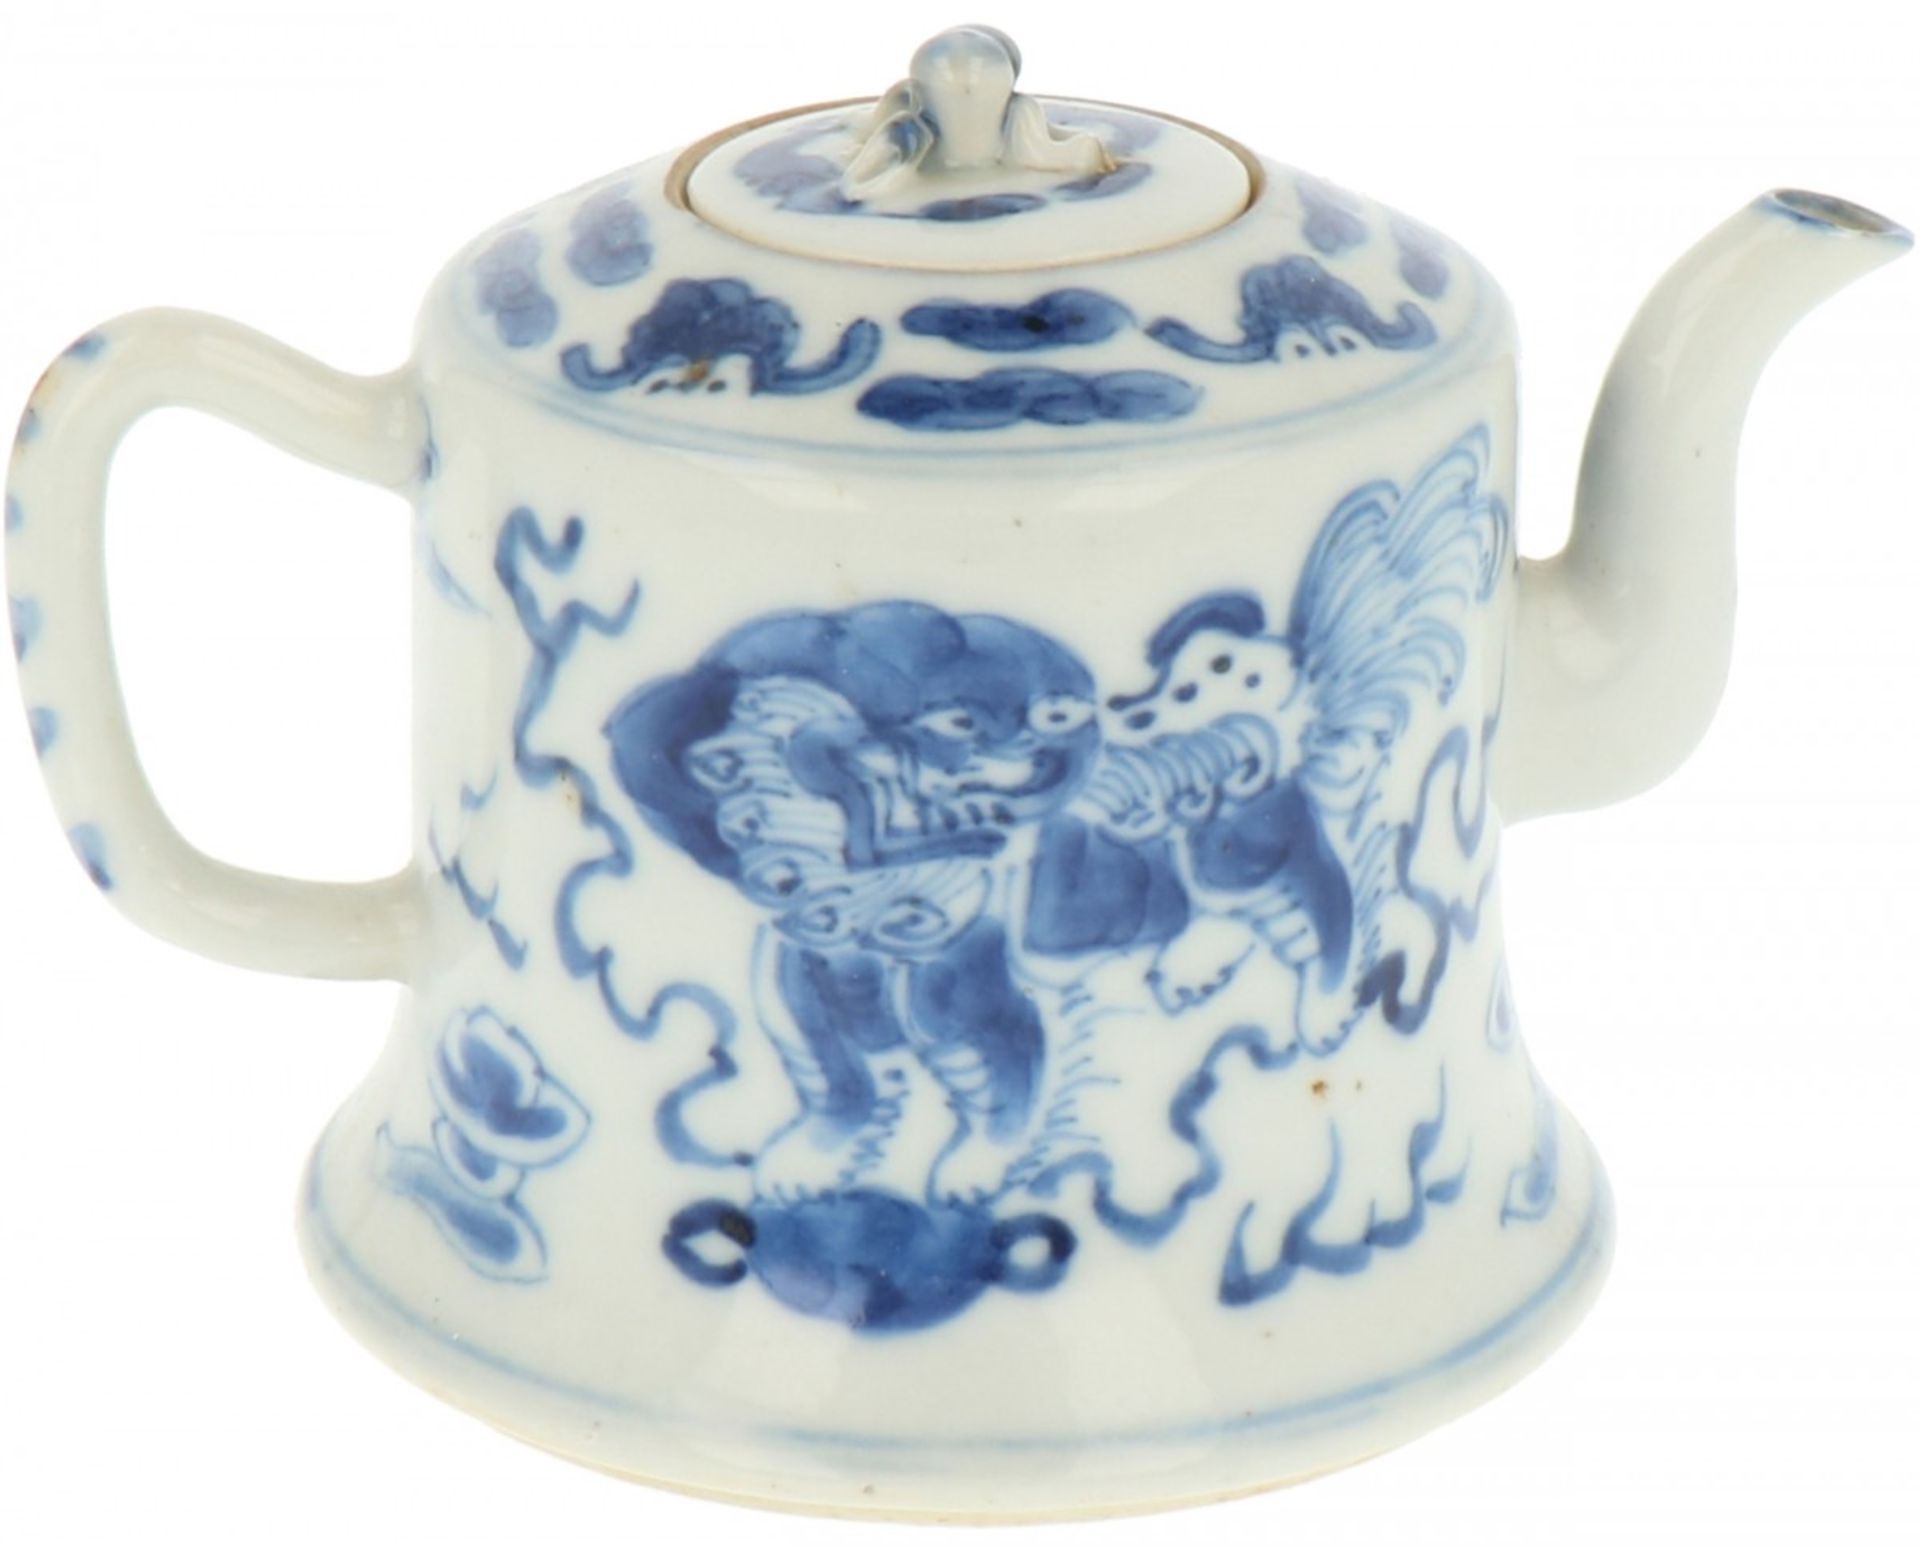 A porcelain teapot with Foo-dogs décor, marked Kangxi. China, 19th century. - Image 4 of 7